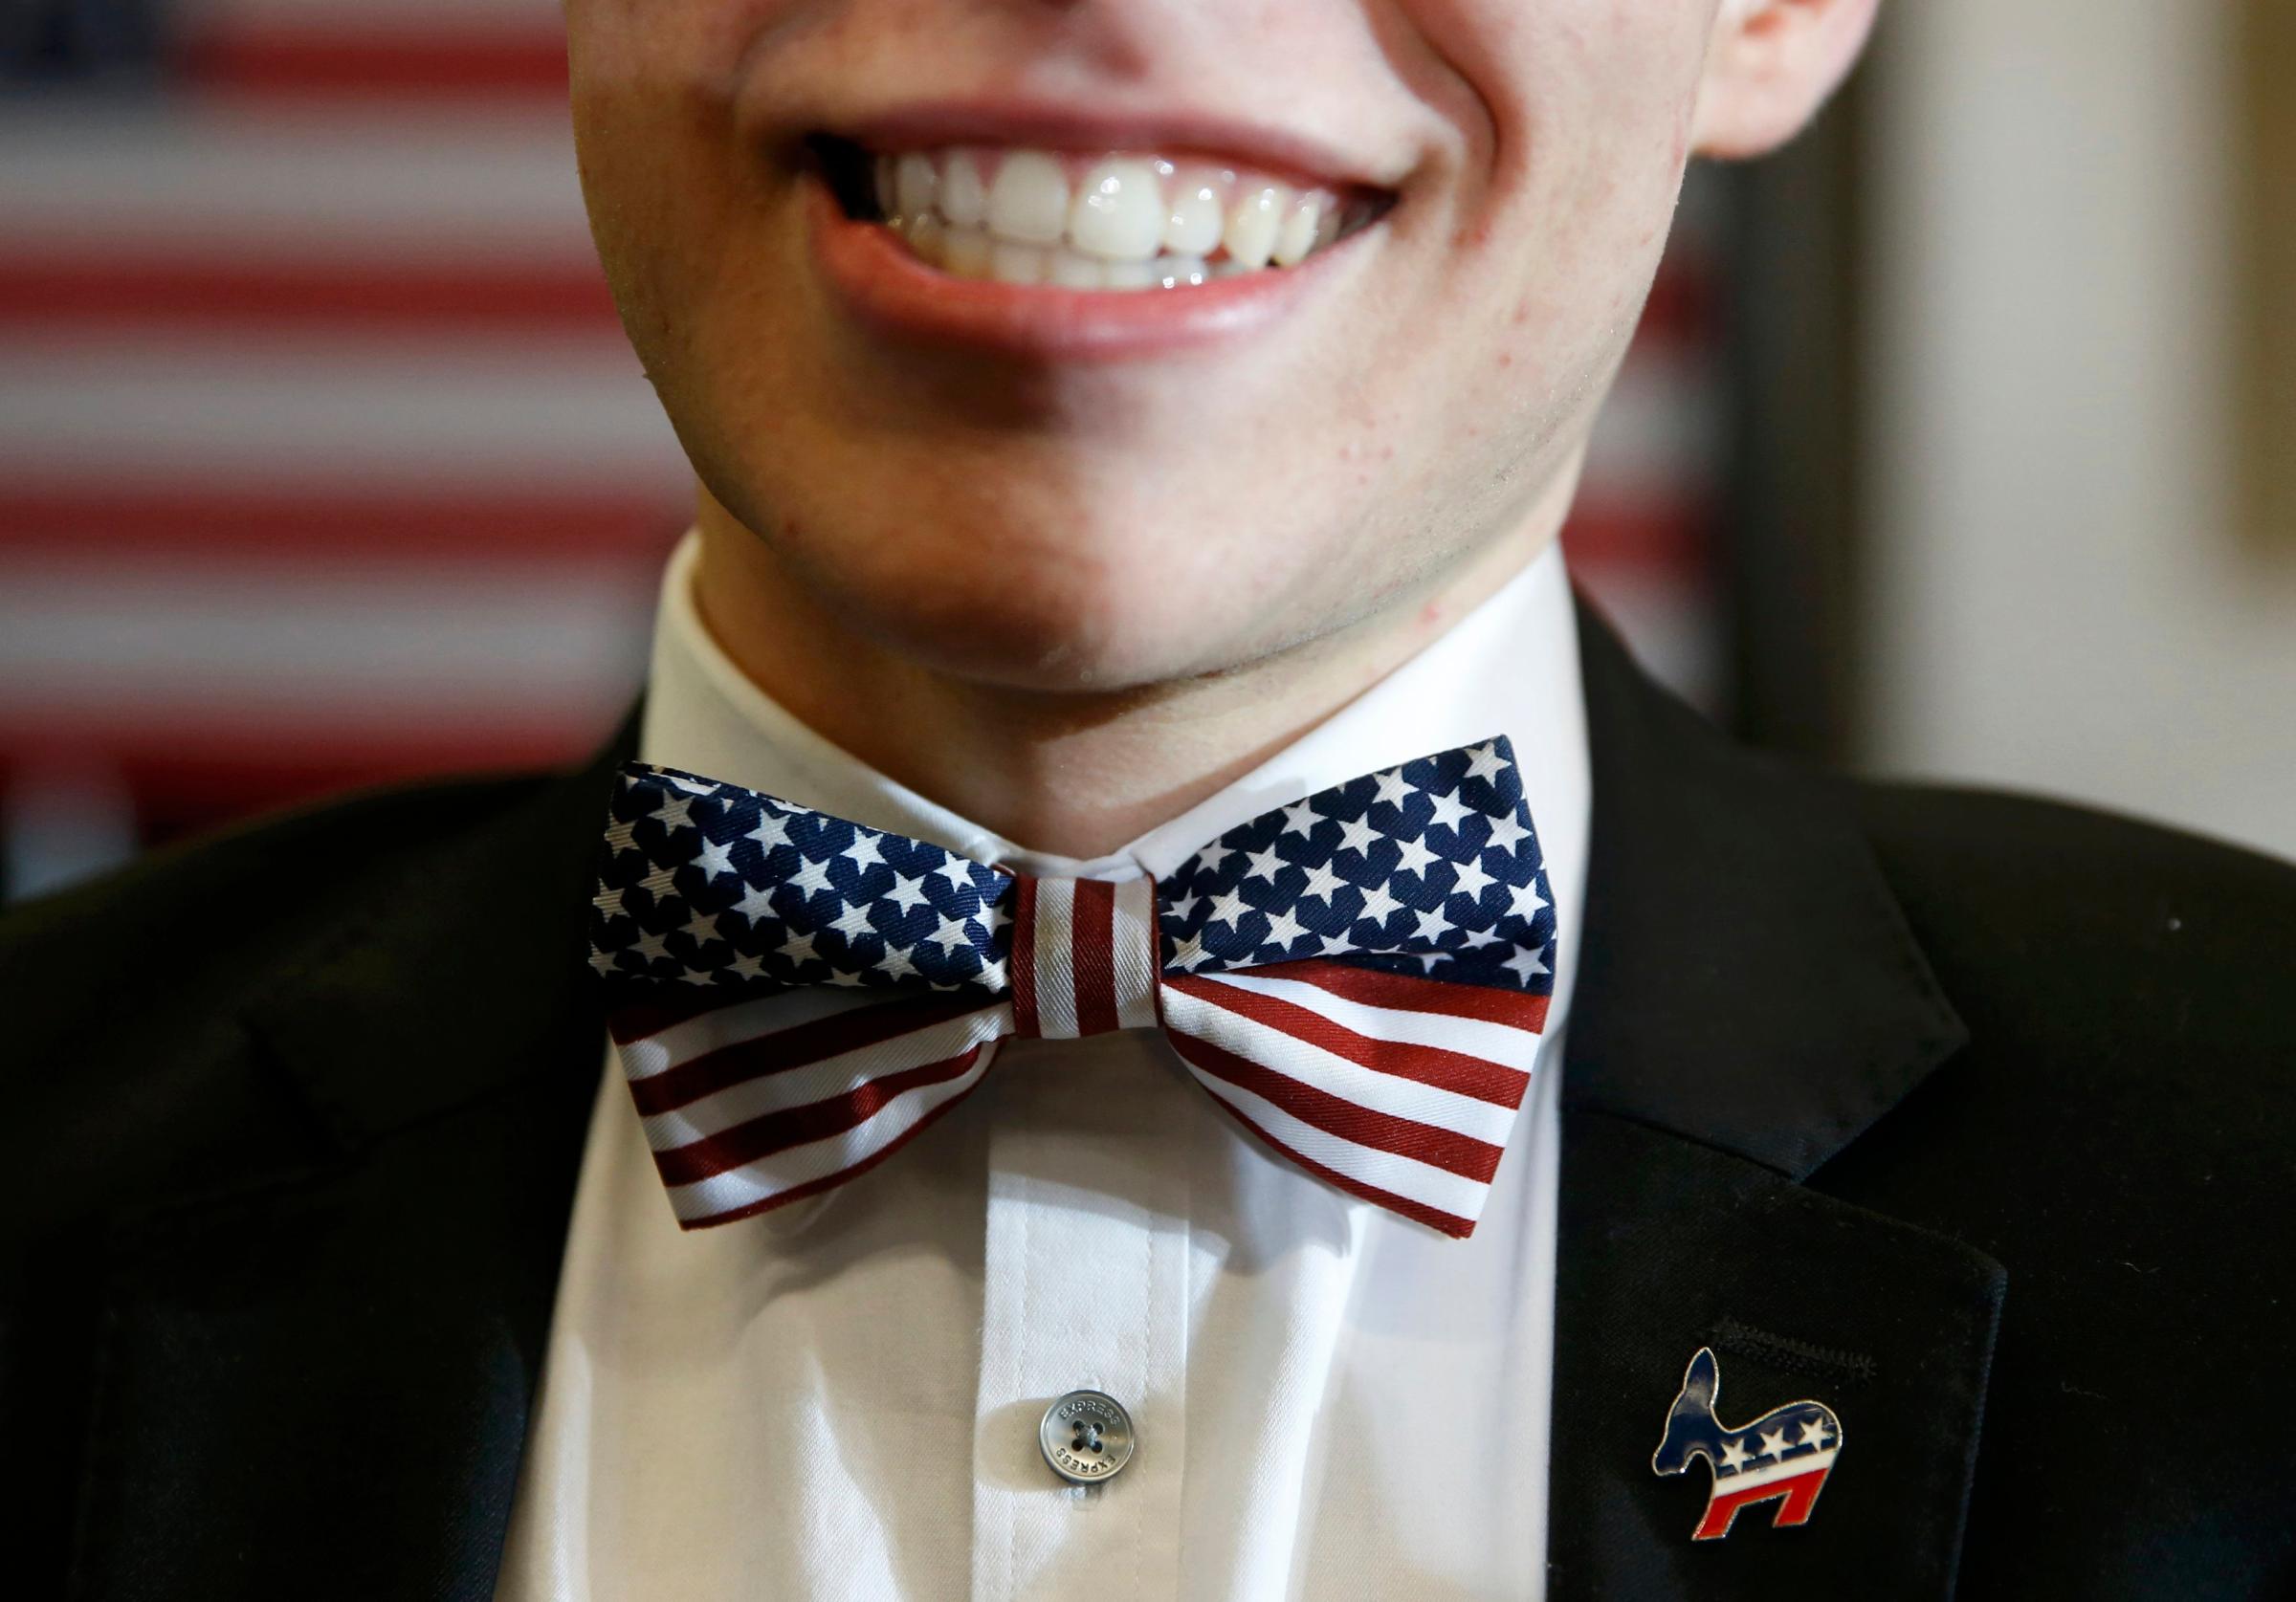 David Evers, a supporter of Democratic presidential candidate Hillary Clinton, attends her caucus night rally in Des Moines, Iowa on Feb. 1, 2016.